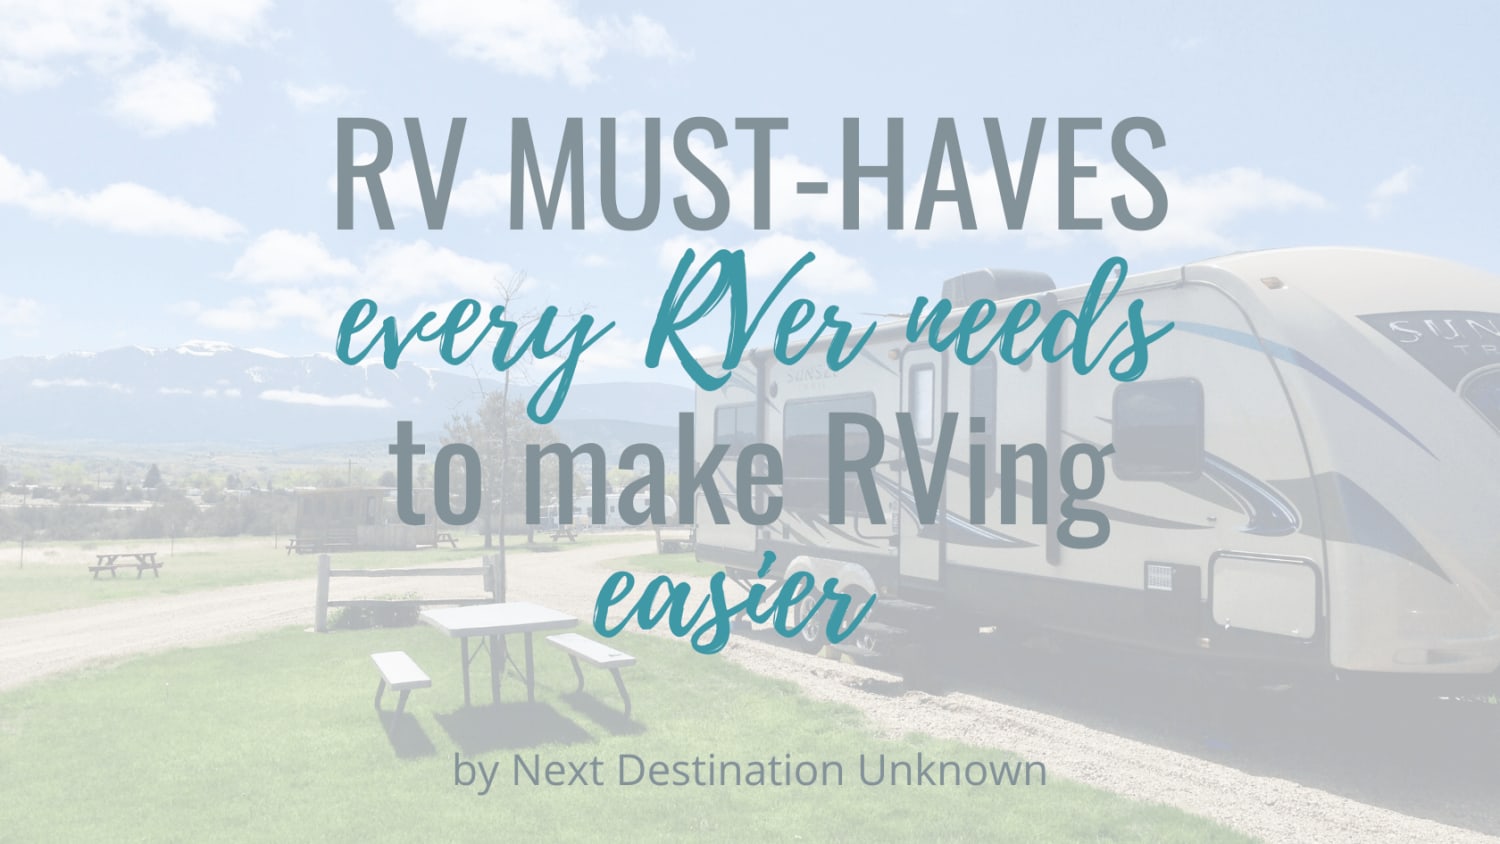 RV Must-Haves Every RVer Needs to Make RVing Easier